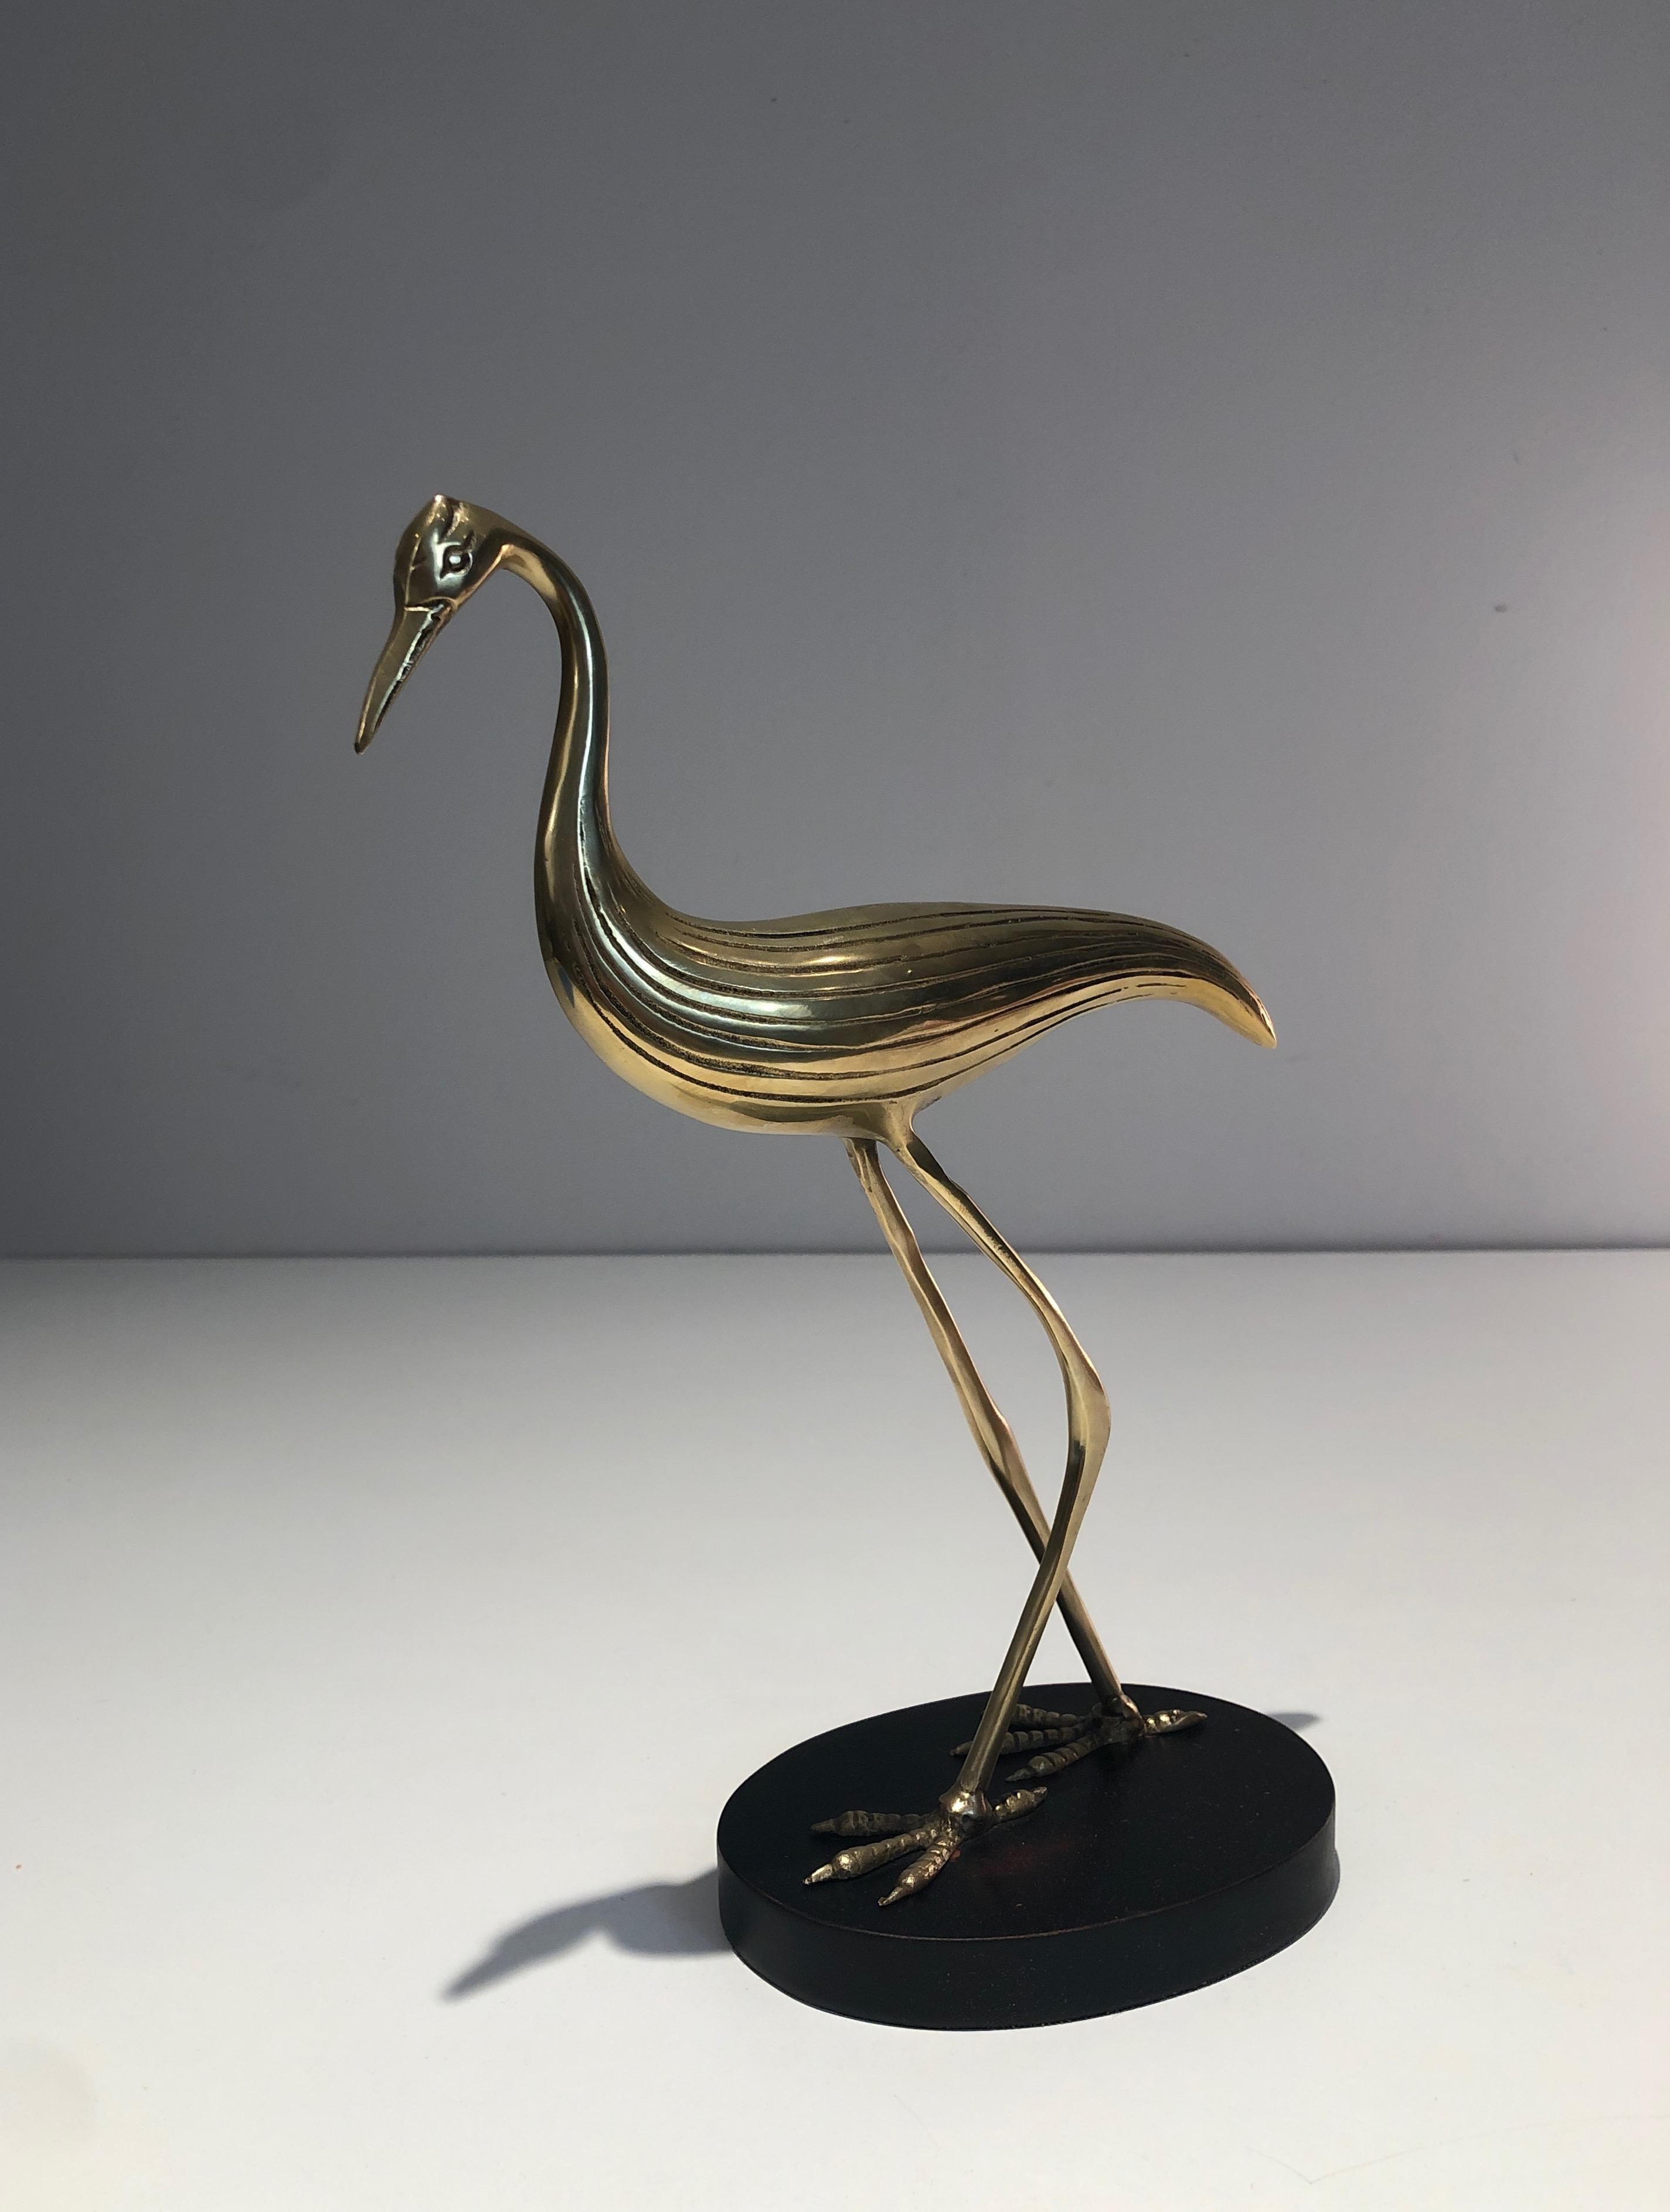 This stylish bird is made of brass on a blackened base. This is a French work. Circa 1970.